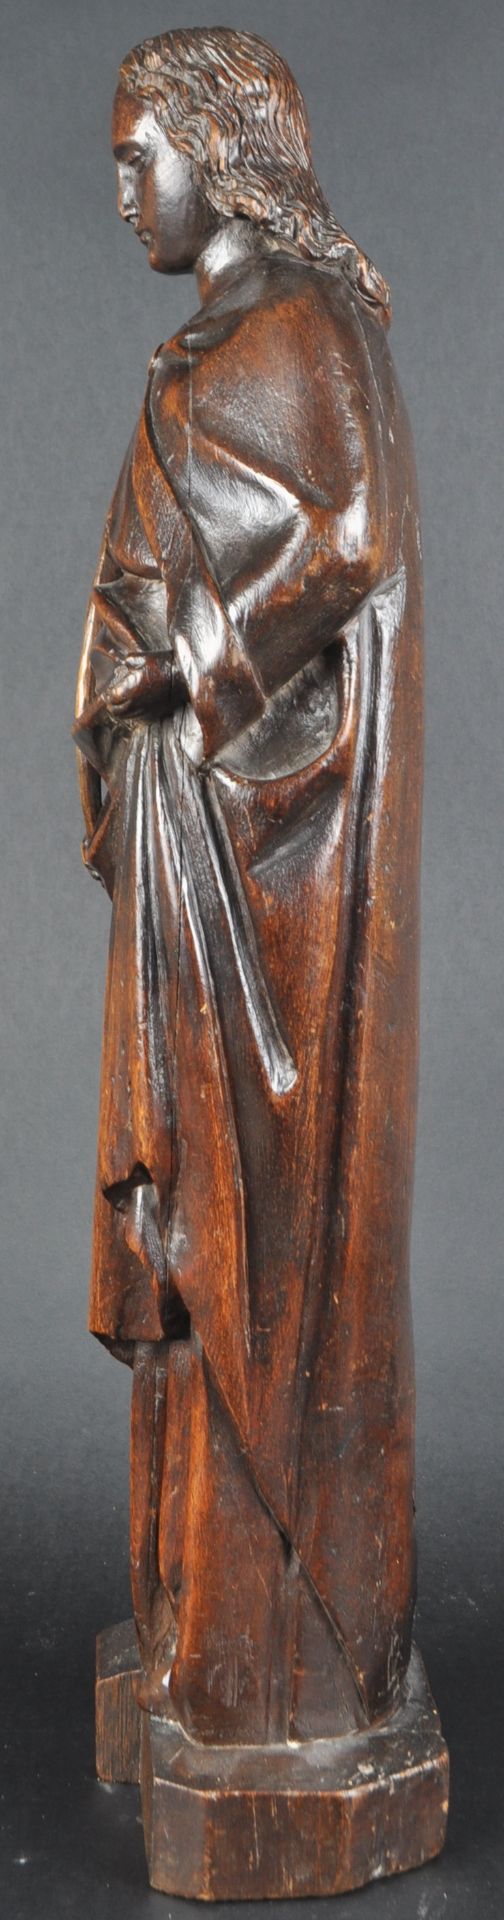 19TH CENTURY MAHOGANY CARVED STATUE OF A SAINT - Image 4 of 6